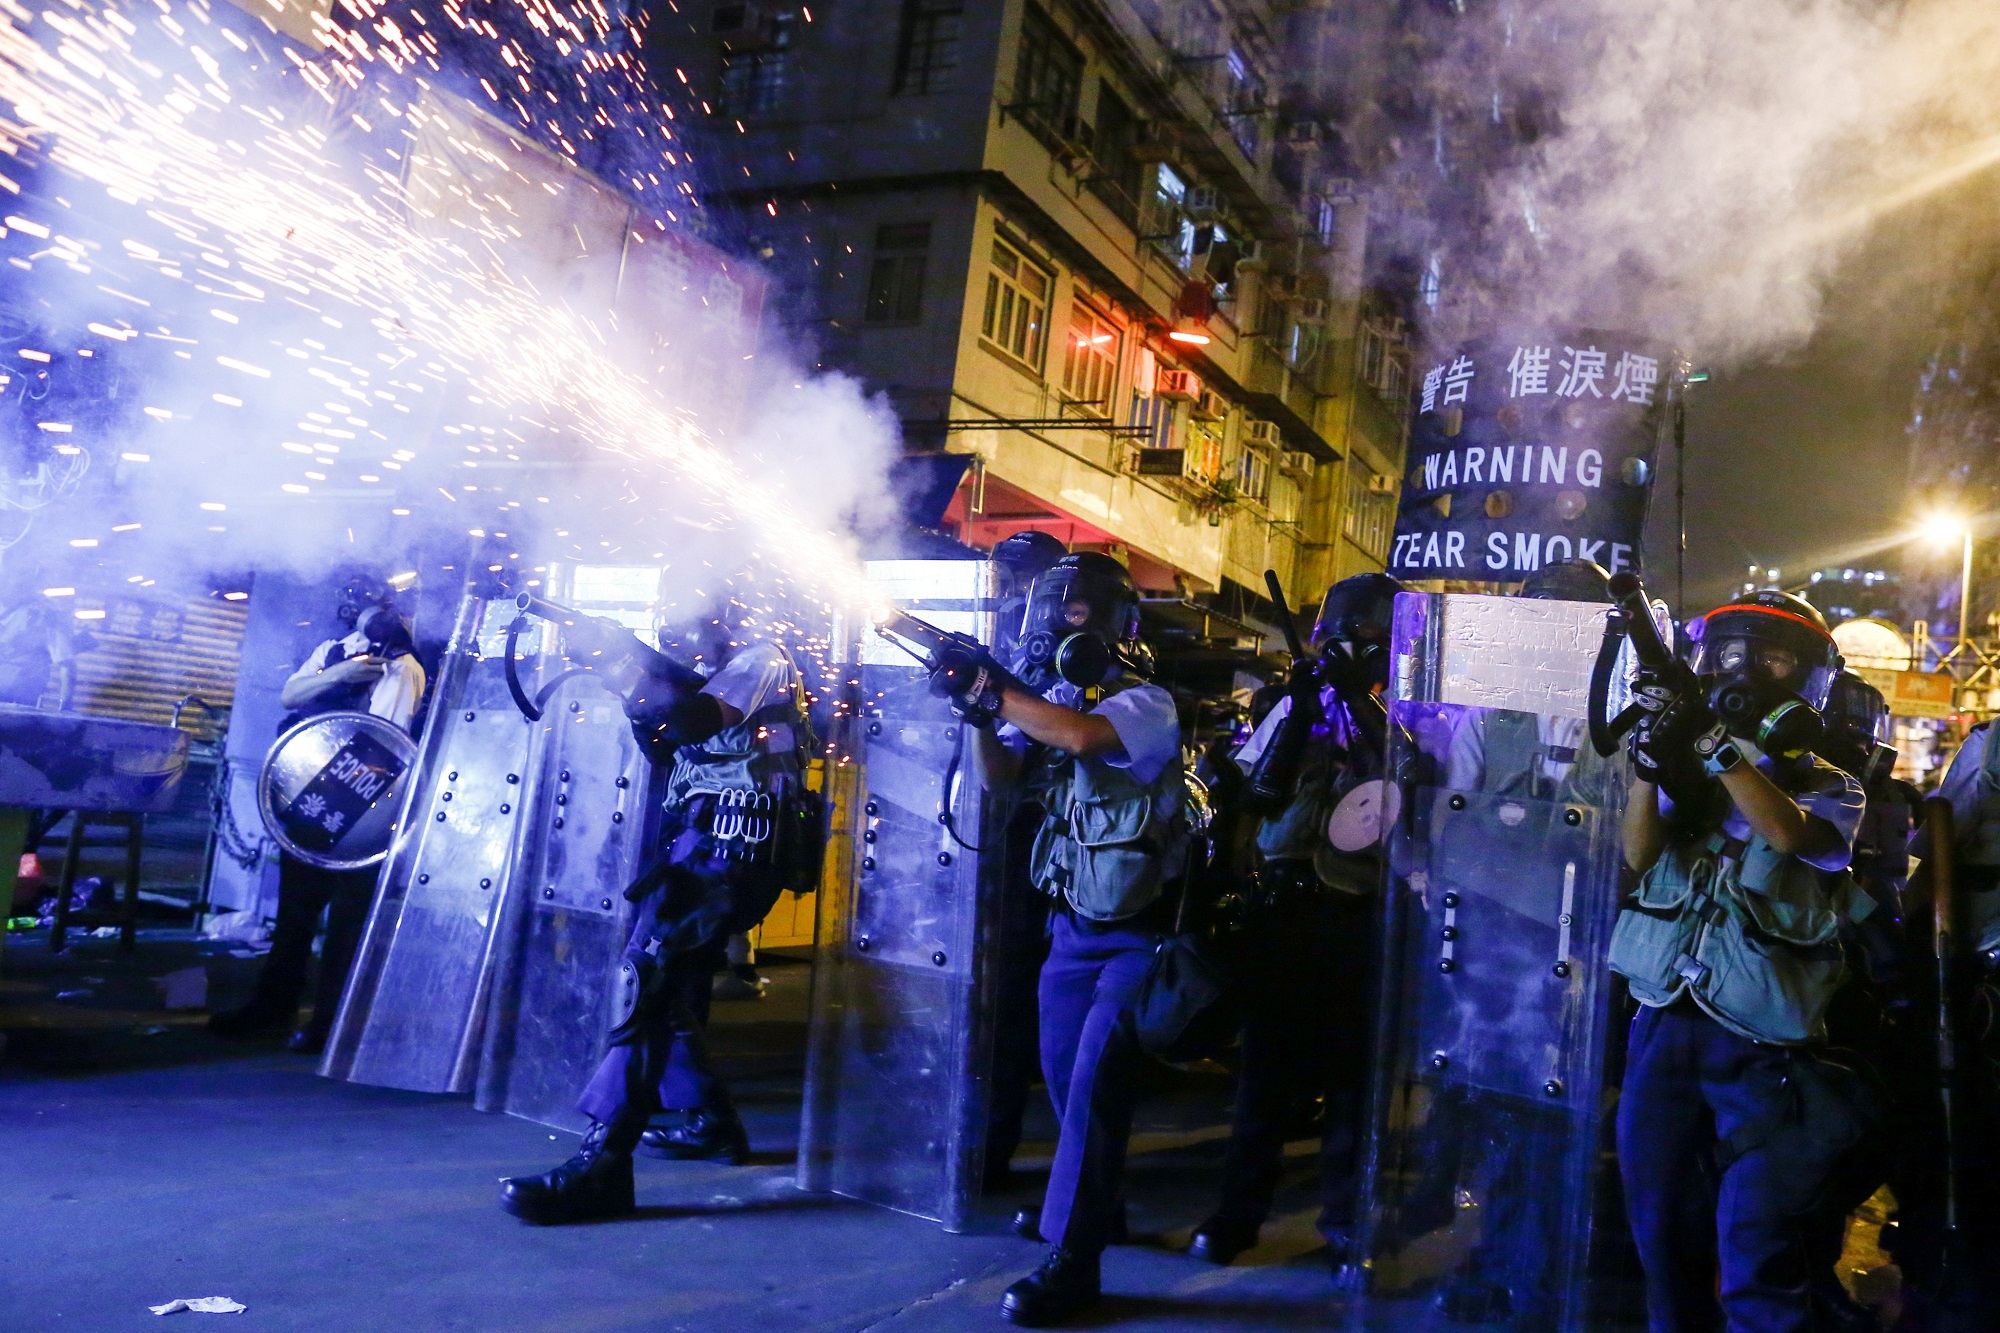 Police fire tear gas at protesters during clashes in the Sham Shui Po neighborhood of Hong Kong in mid-August. Photo: Thomas Peter/Reuters